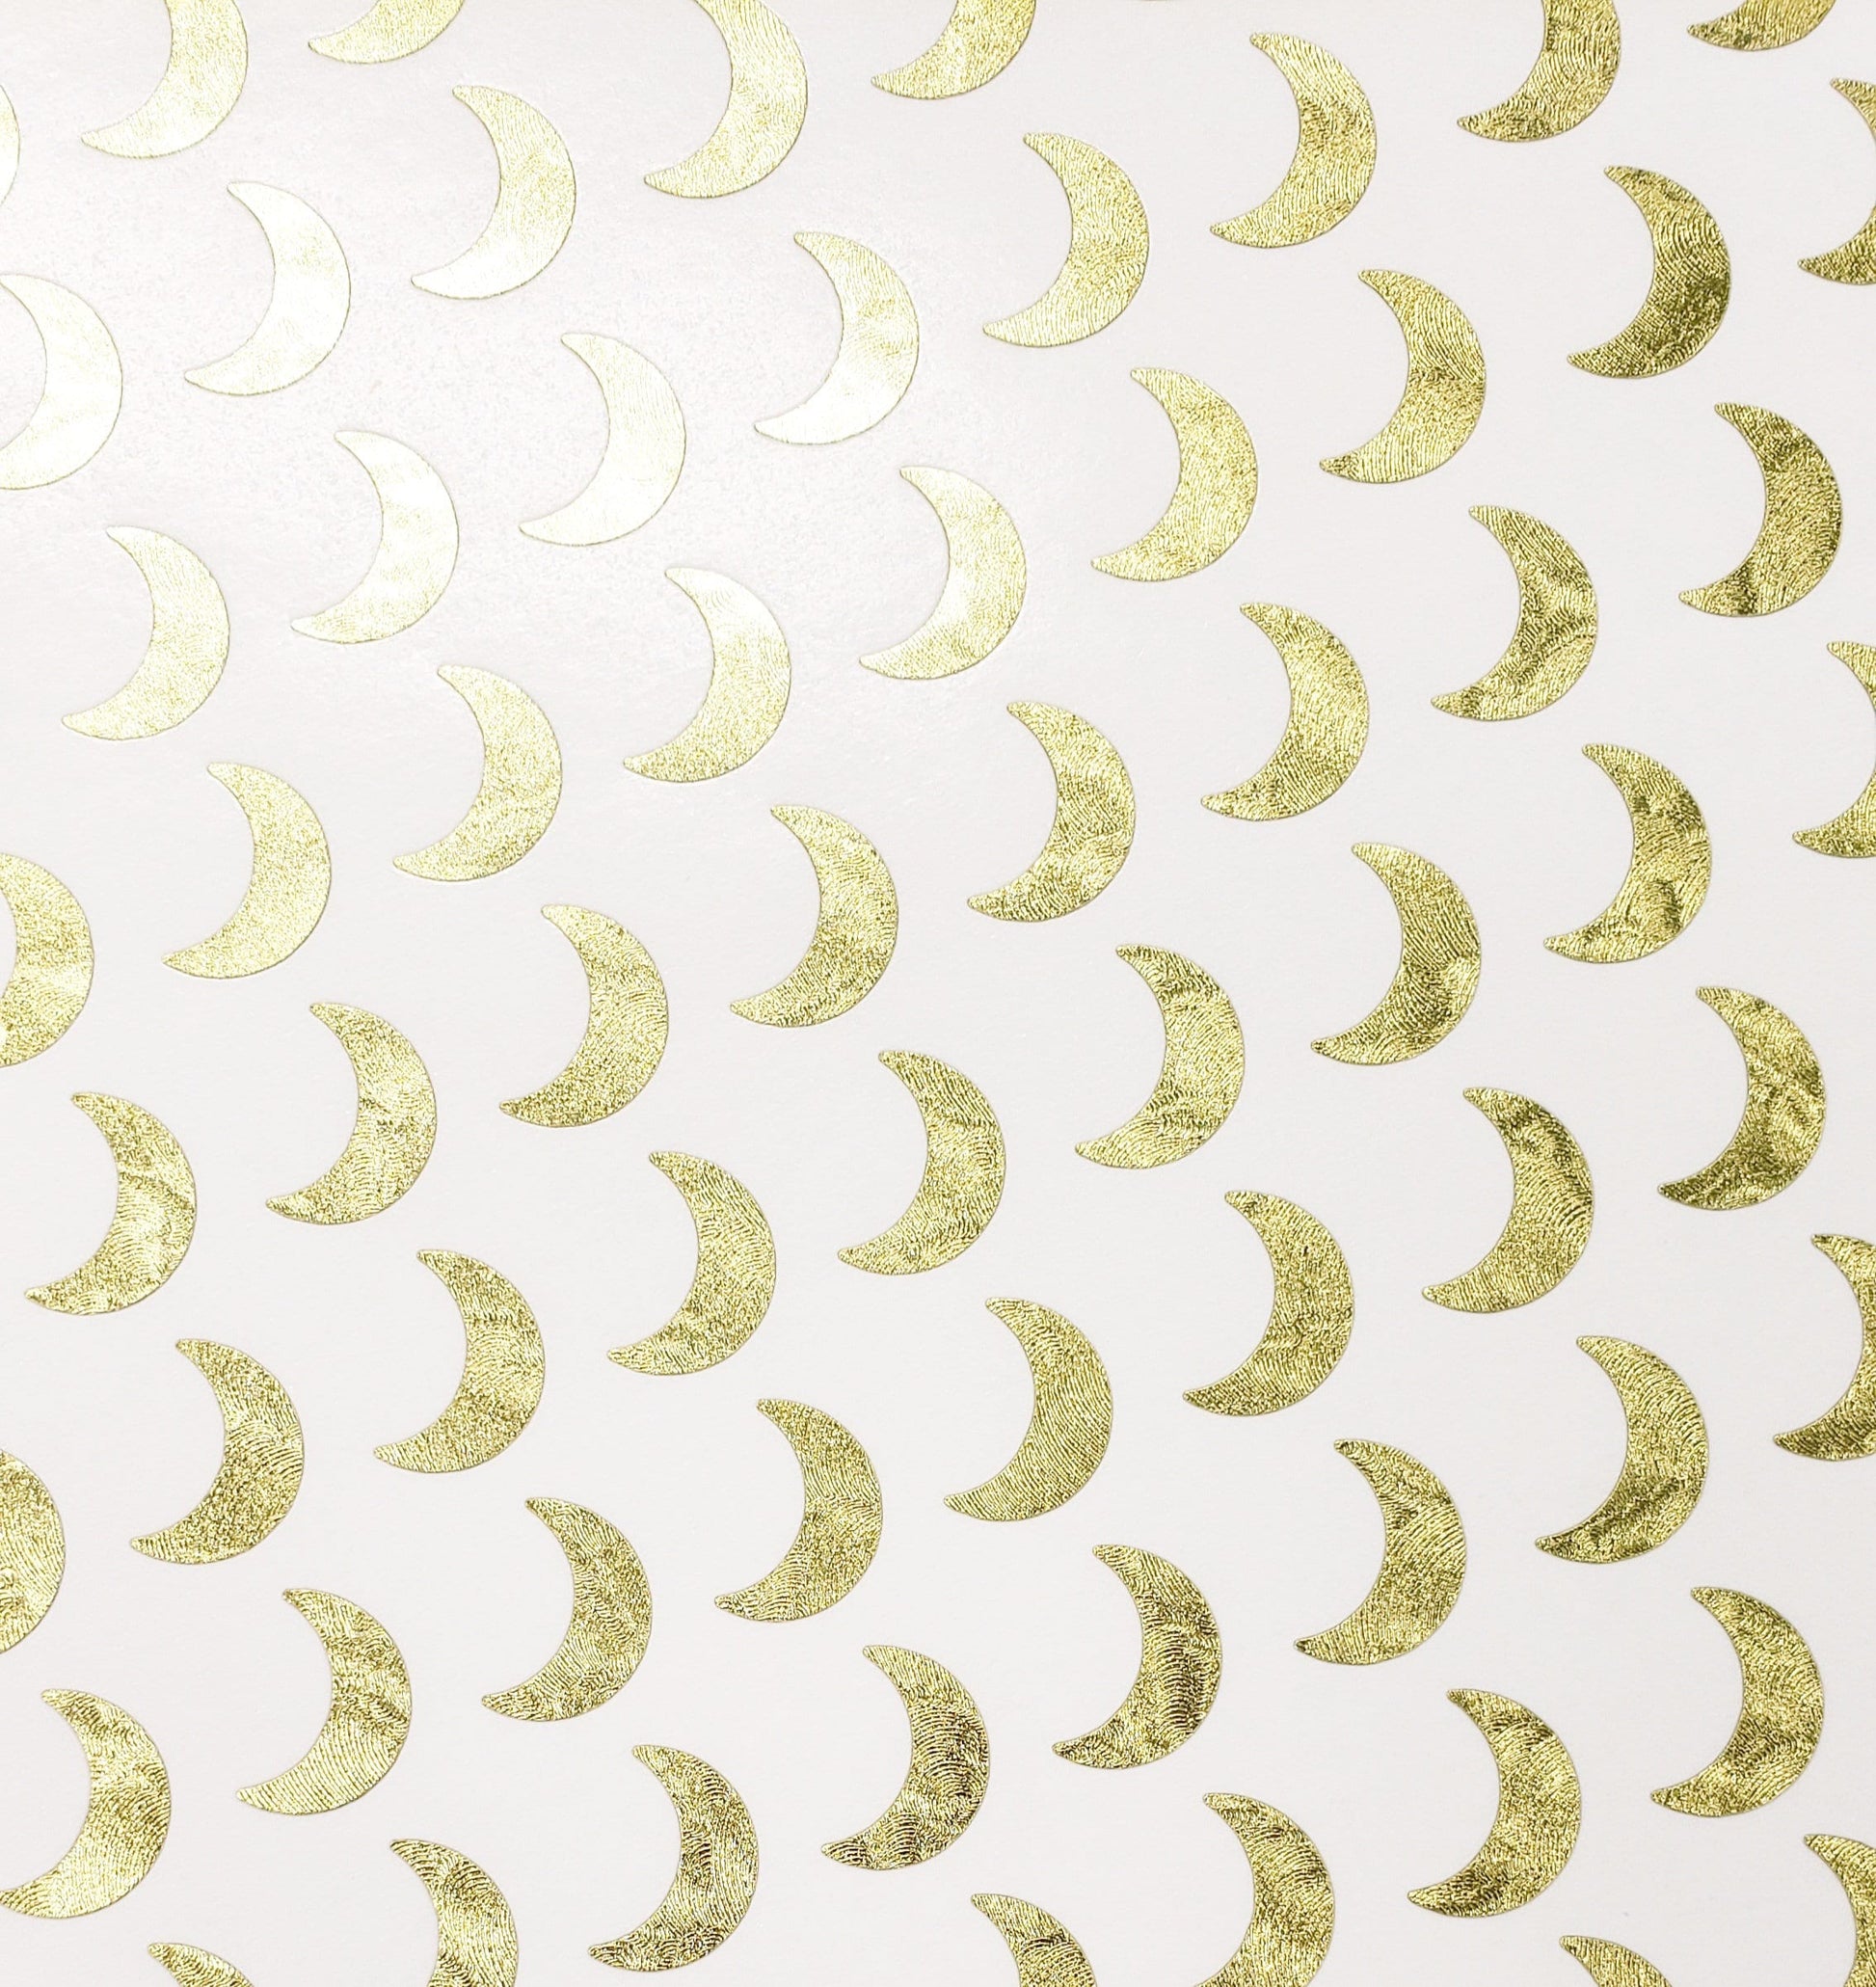 Moon Stickers, set of 50 or 100 metallic gold or silver crescent moons, decorative peel and stick moons for journals, notebooks and crafts